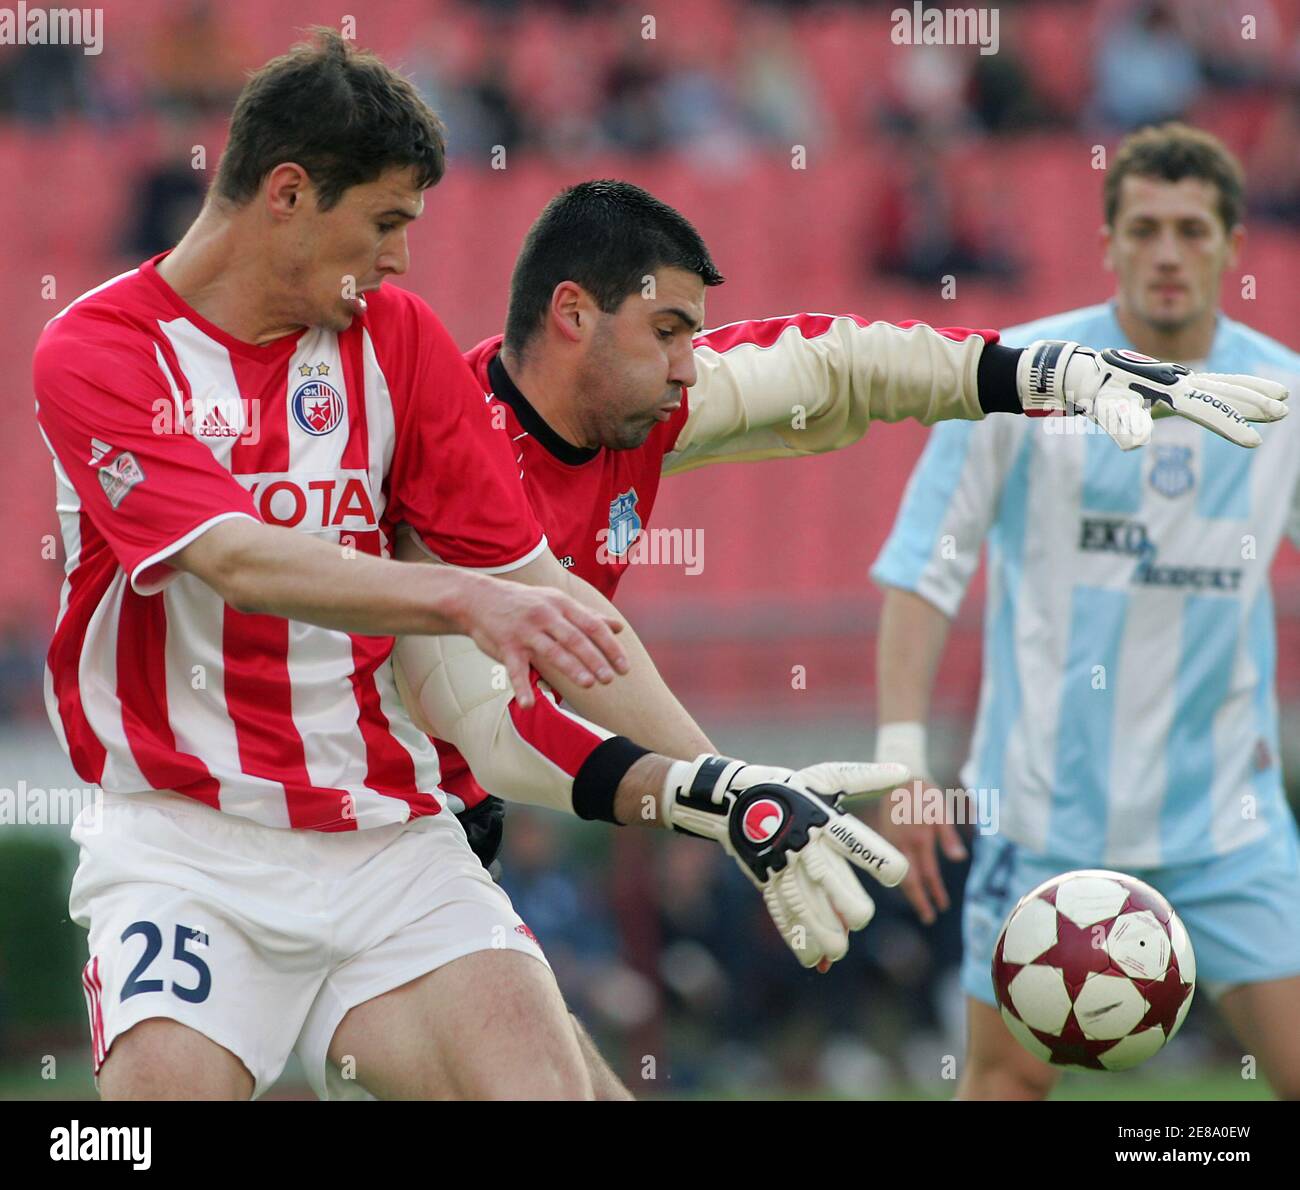 Red Star's Nikola Zigic (L) struggles for the ball with Nenad Eric of OFK Beograd during their soccer match in Belgrade April 22, 2006. Red Star beat OFK Beograd 2-0. Djokic scored two goals. REUTERS/Ivan Milutinovic Stock Photo